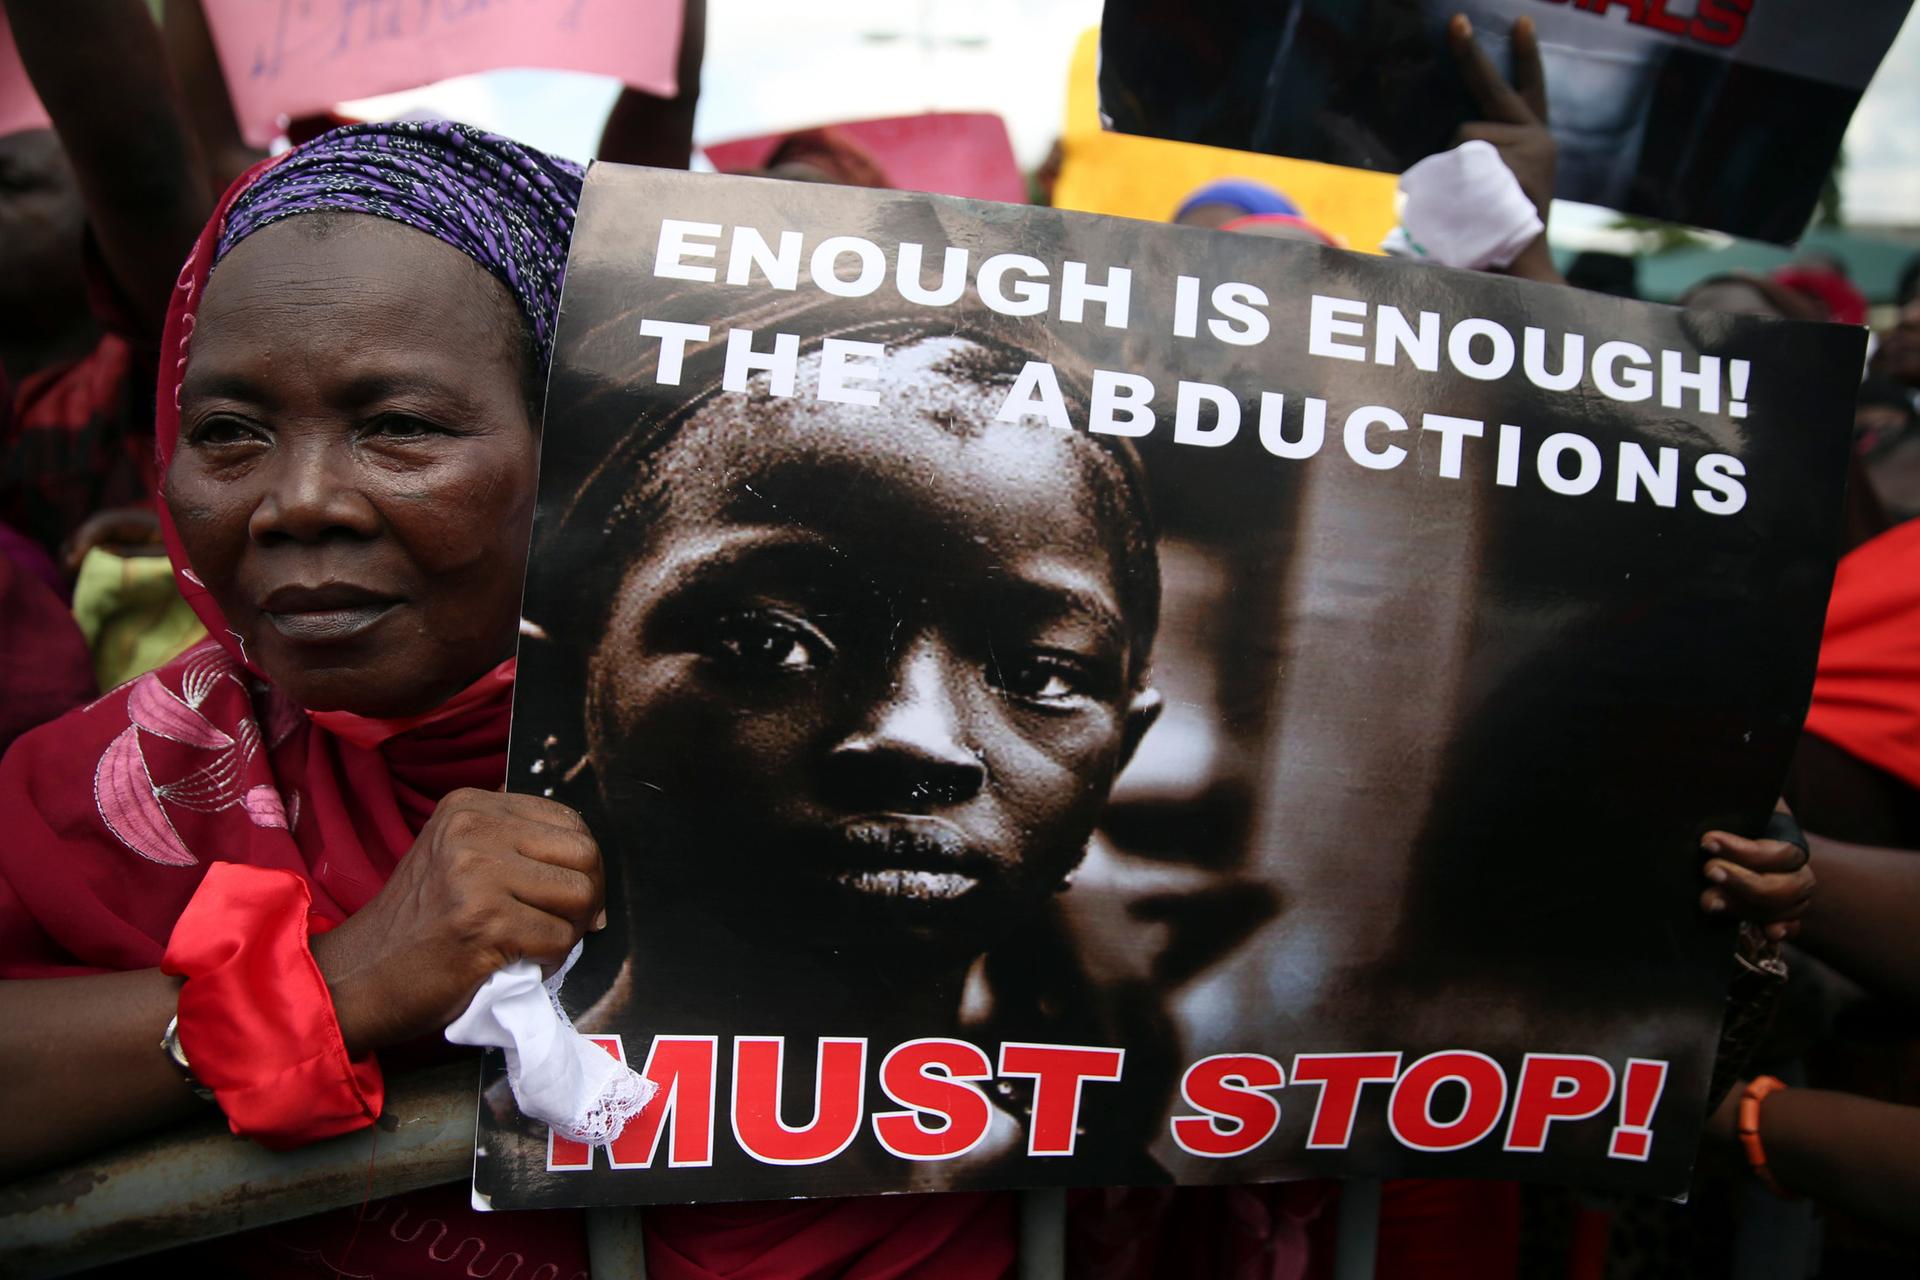 A woman holds a sign during a protest demanding the release of abducted school girls from the remote village of Chibok in northeast Nigeria.